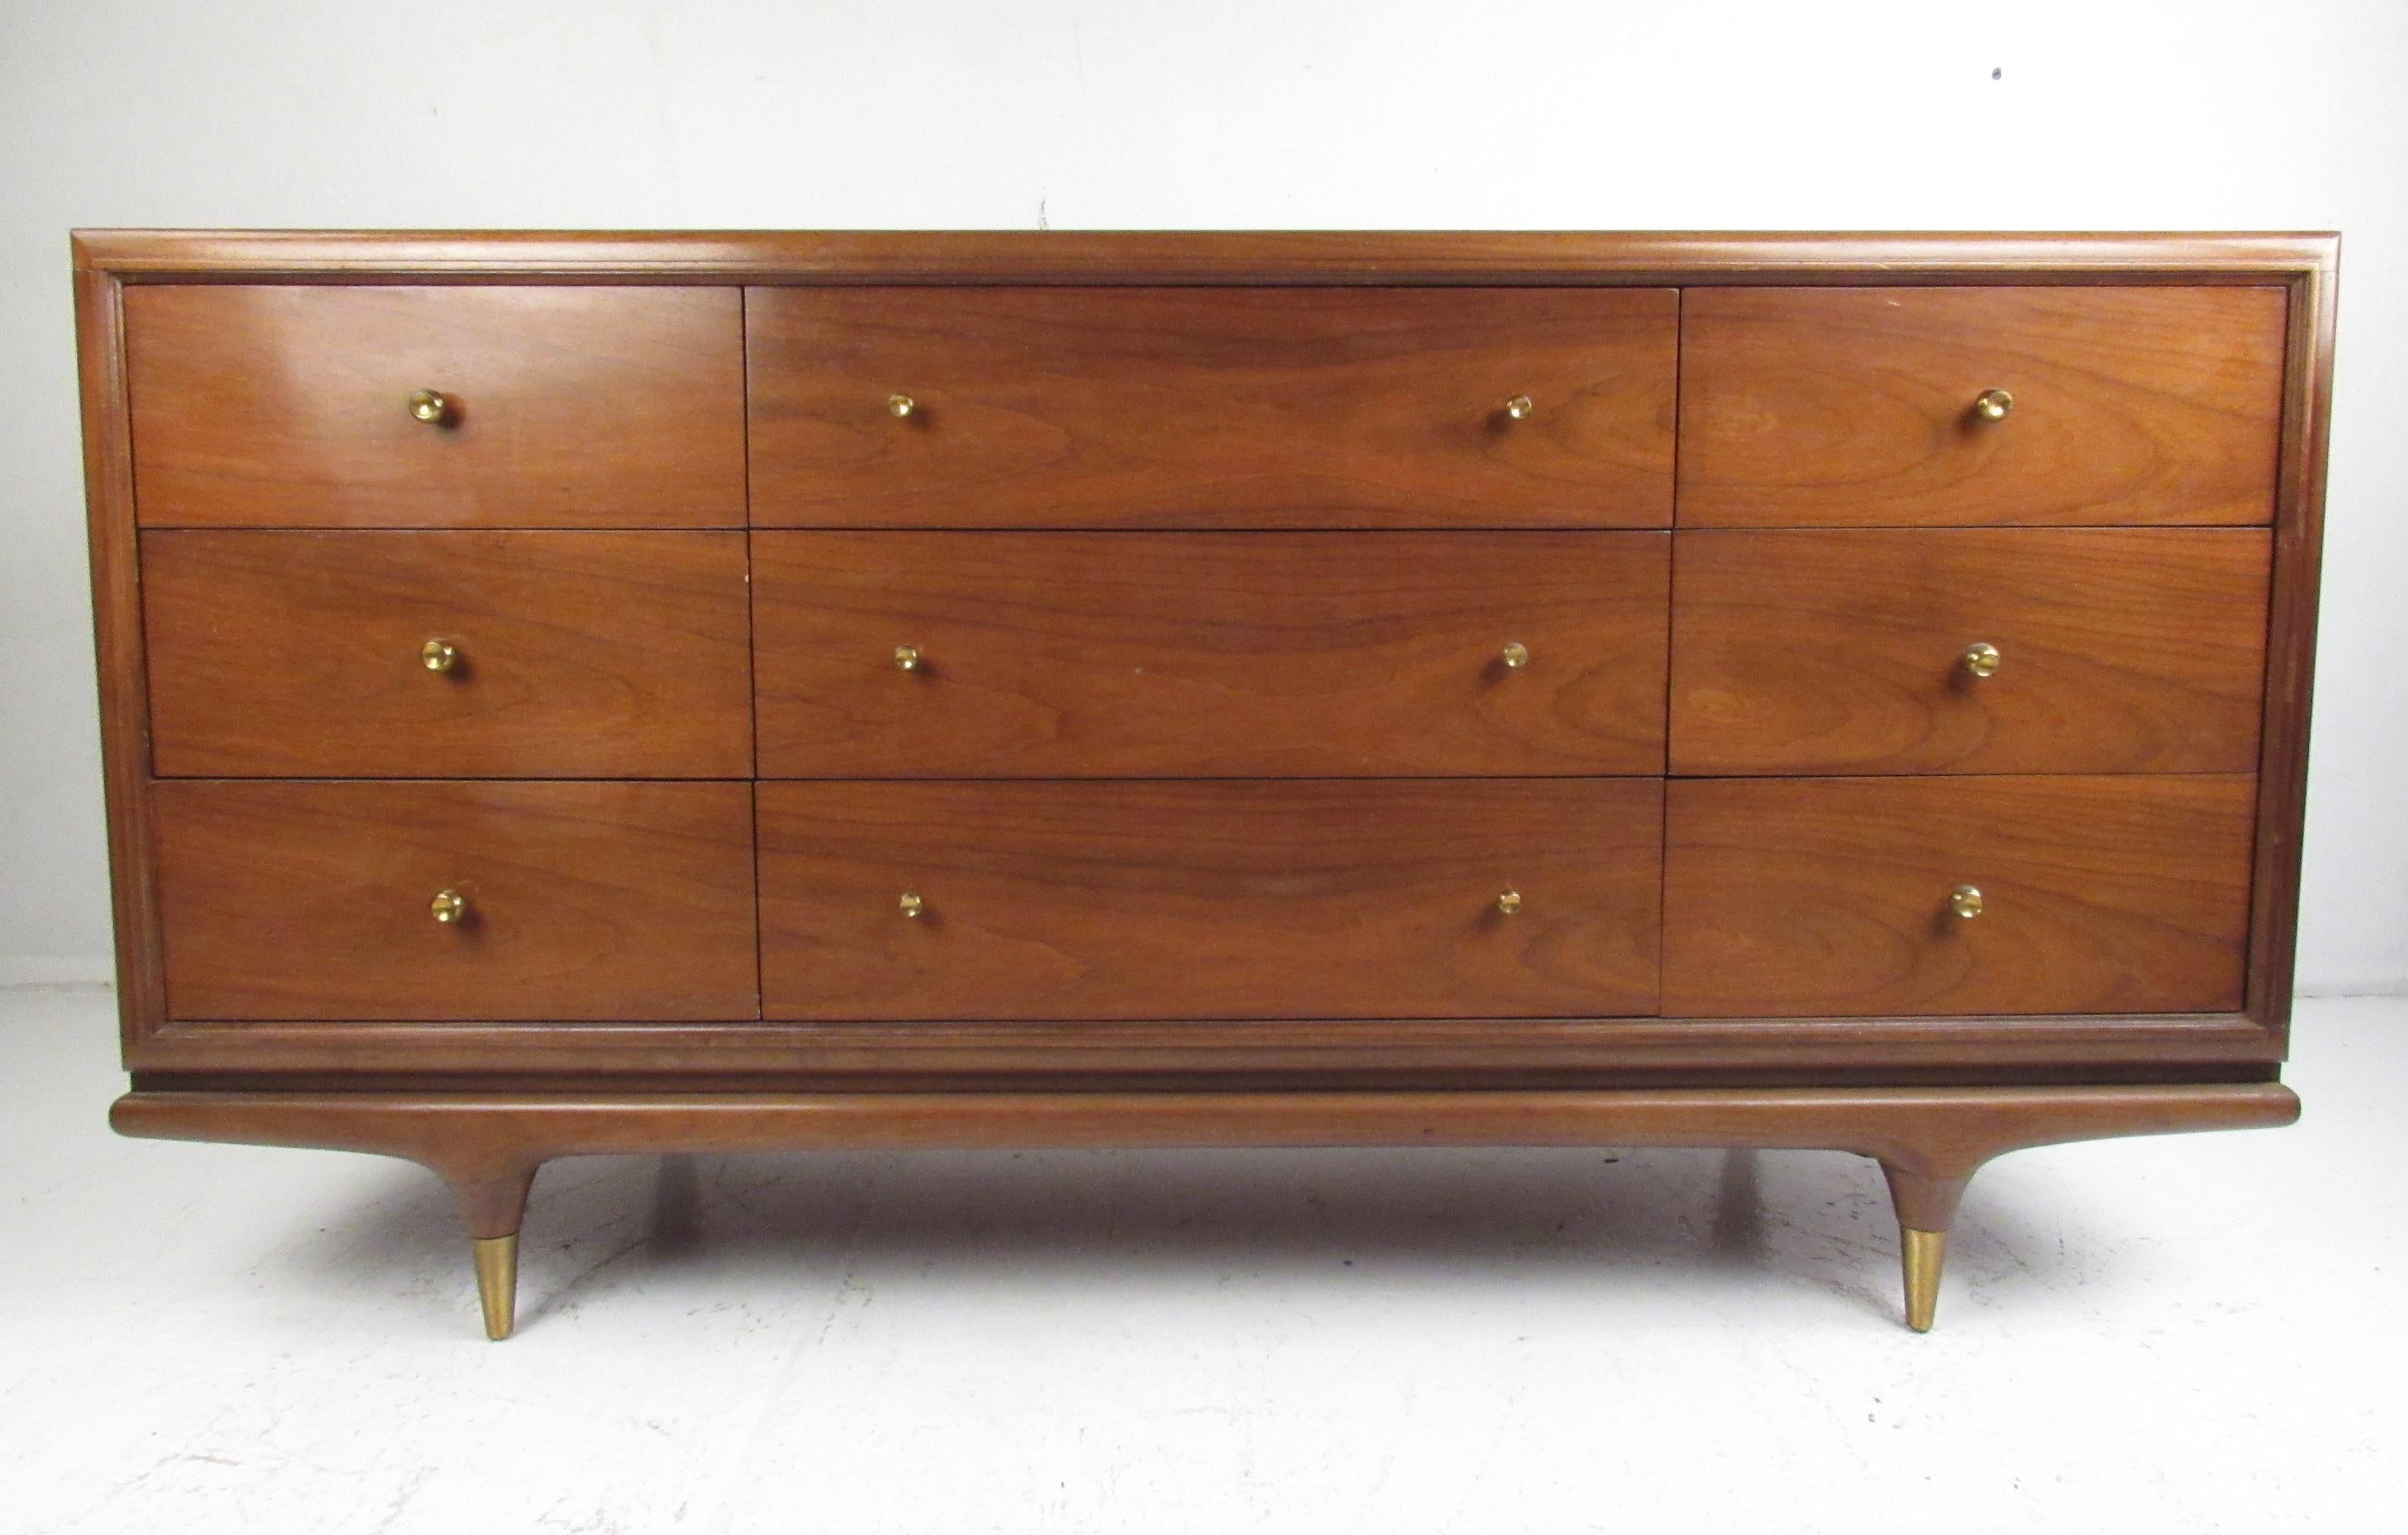 This stunning vintage modern dresser features nine hefty drawers with circular metal pulls. An extremely handsome case piece that sits on stubby tapered legs with brass capped feet. The smooth edges and elegant walnut finish make this midcentury